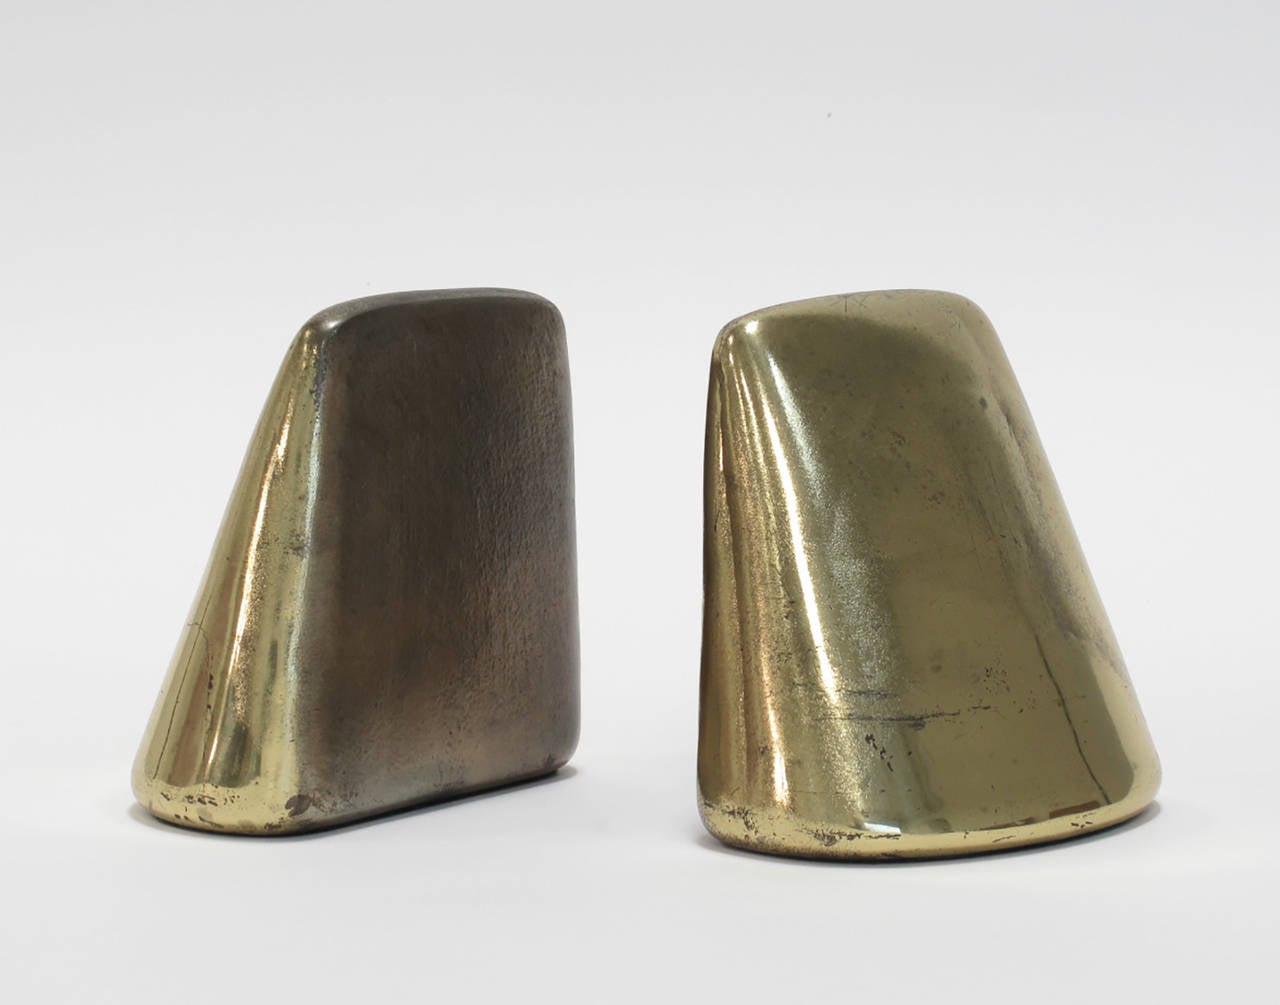 Pair of bookends in brass-plated cast metal designed by Ben Seibel and made by Jenfred Ware, New York, 1950s.

Dimensions of each: 5 1/2